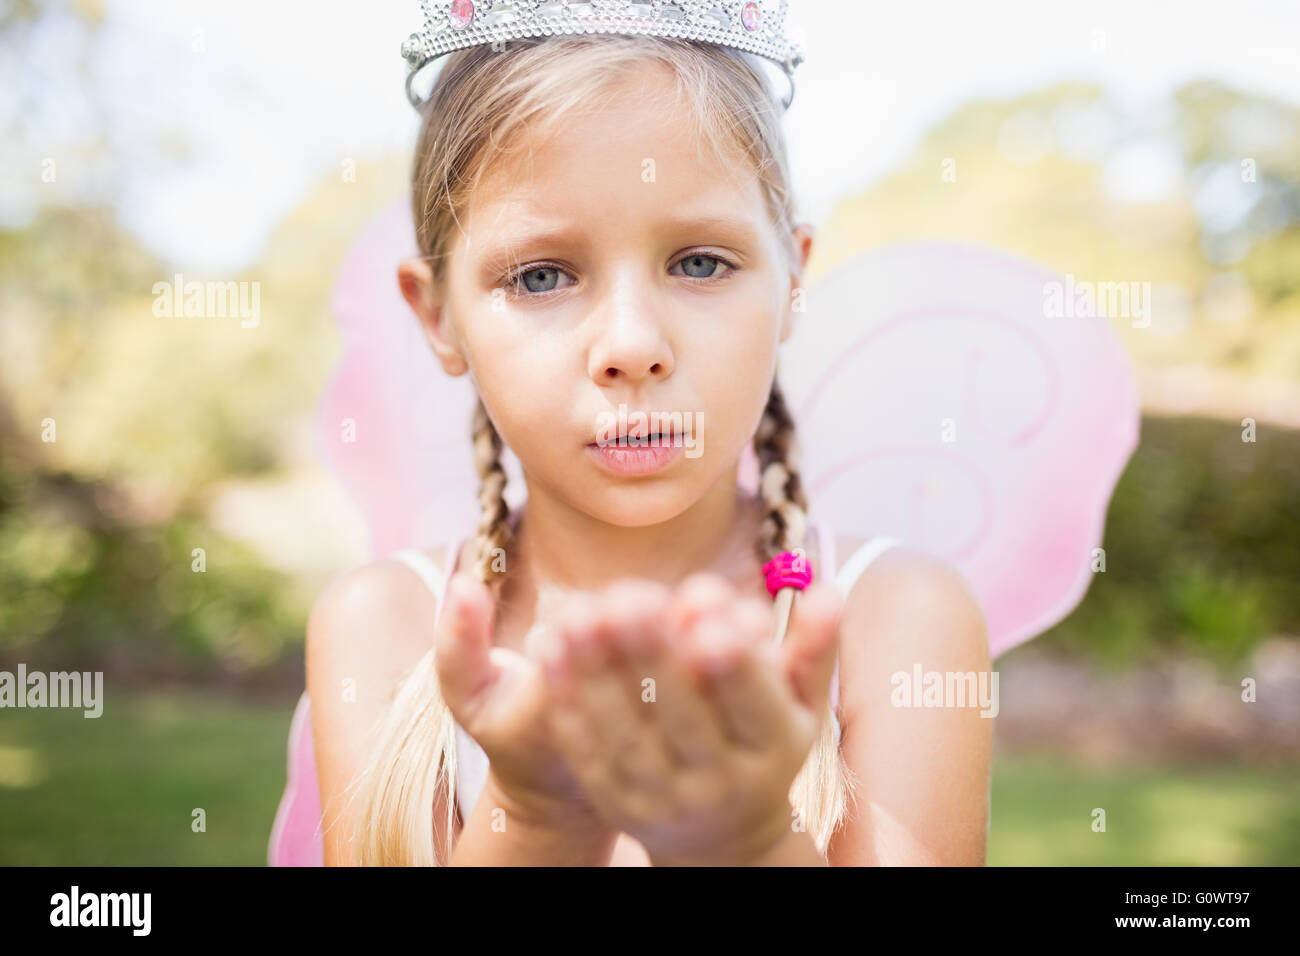 Cute girl blowing kisses Stock Photo